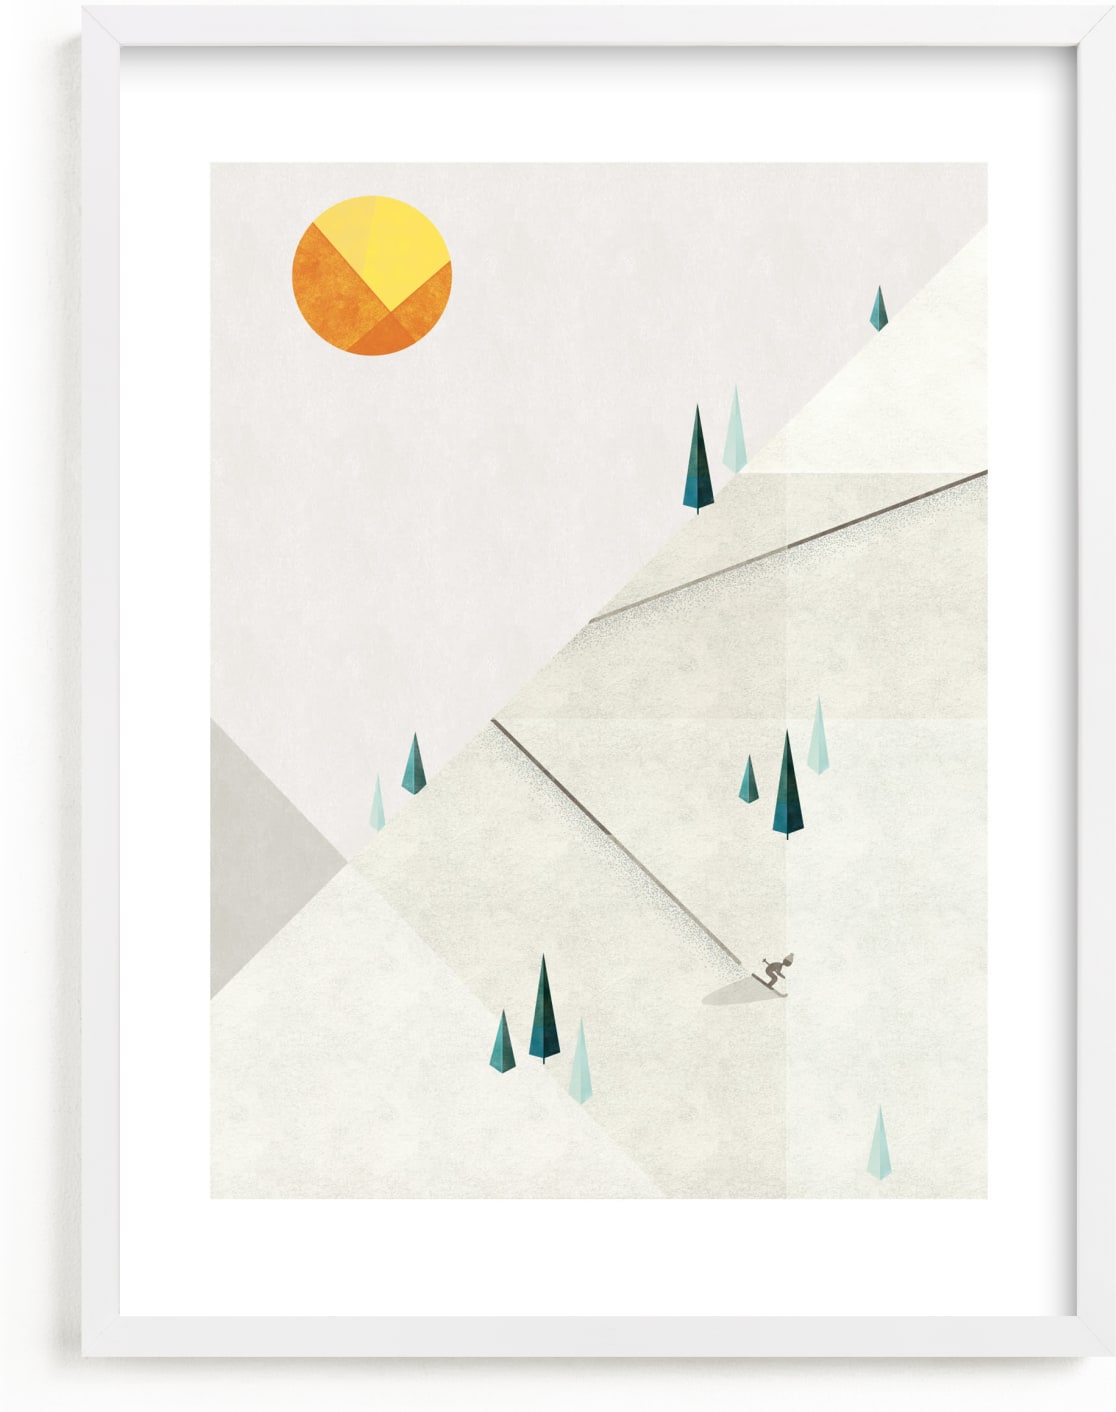 This is a white kids wall art by Robert and Stella called Mountain Adventure.